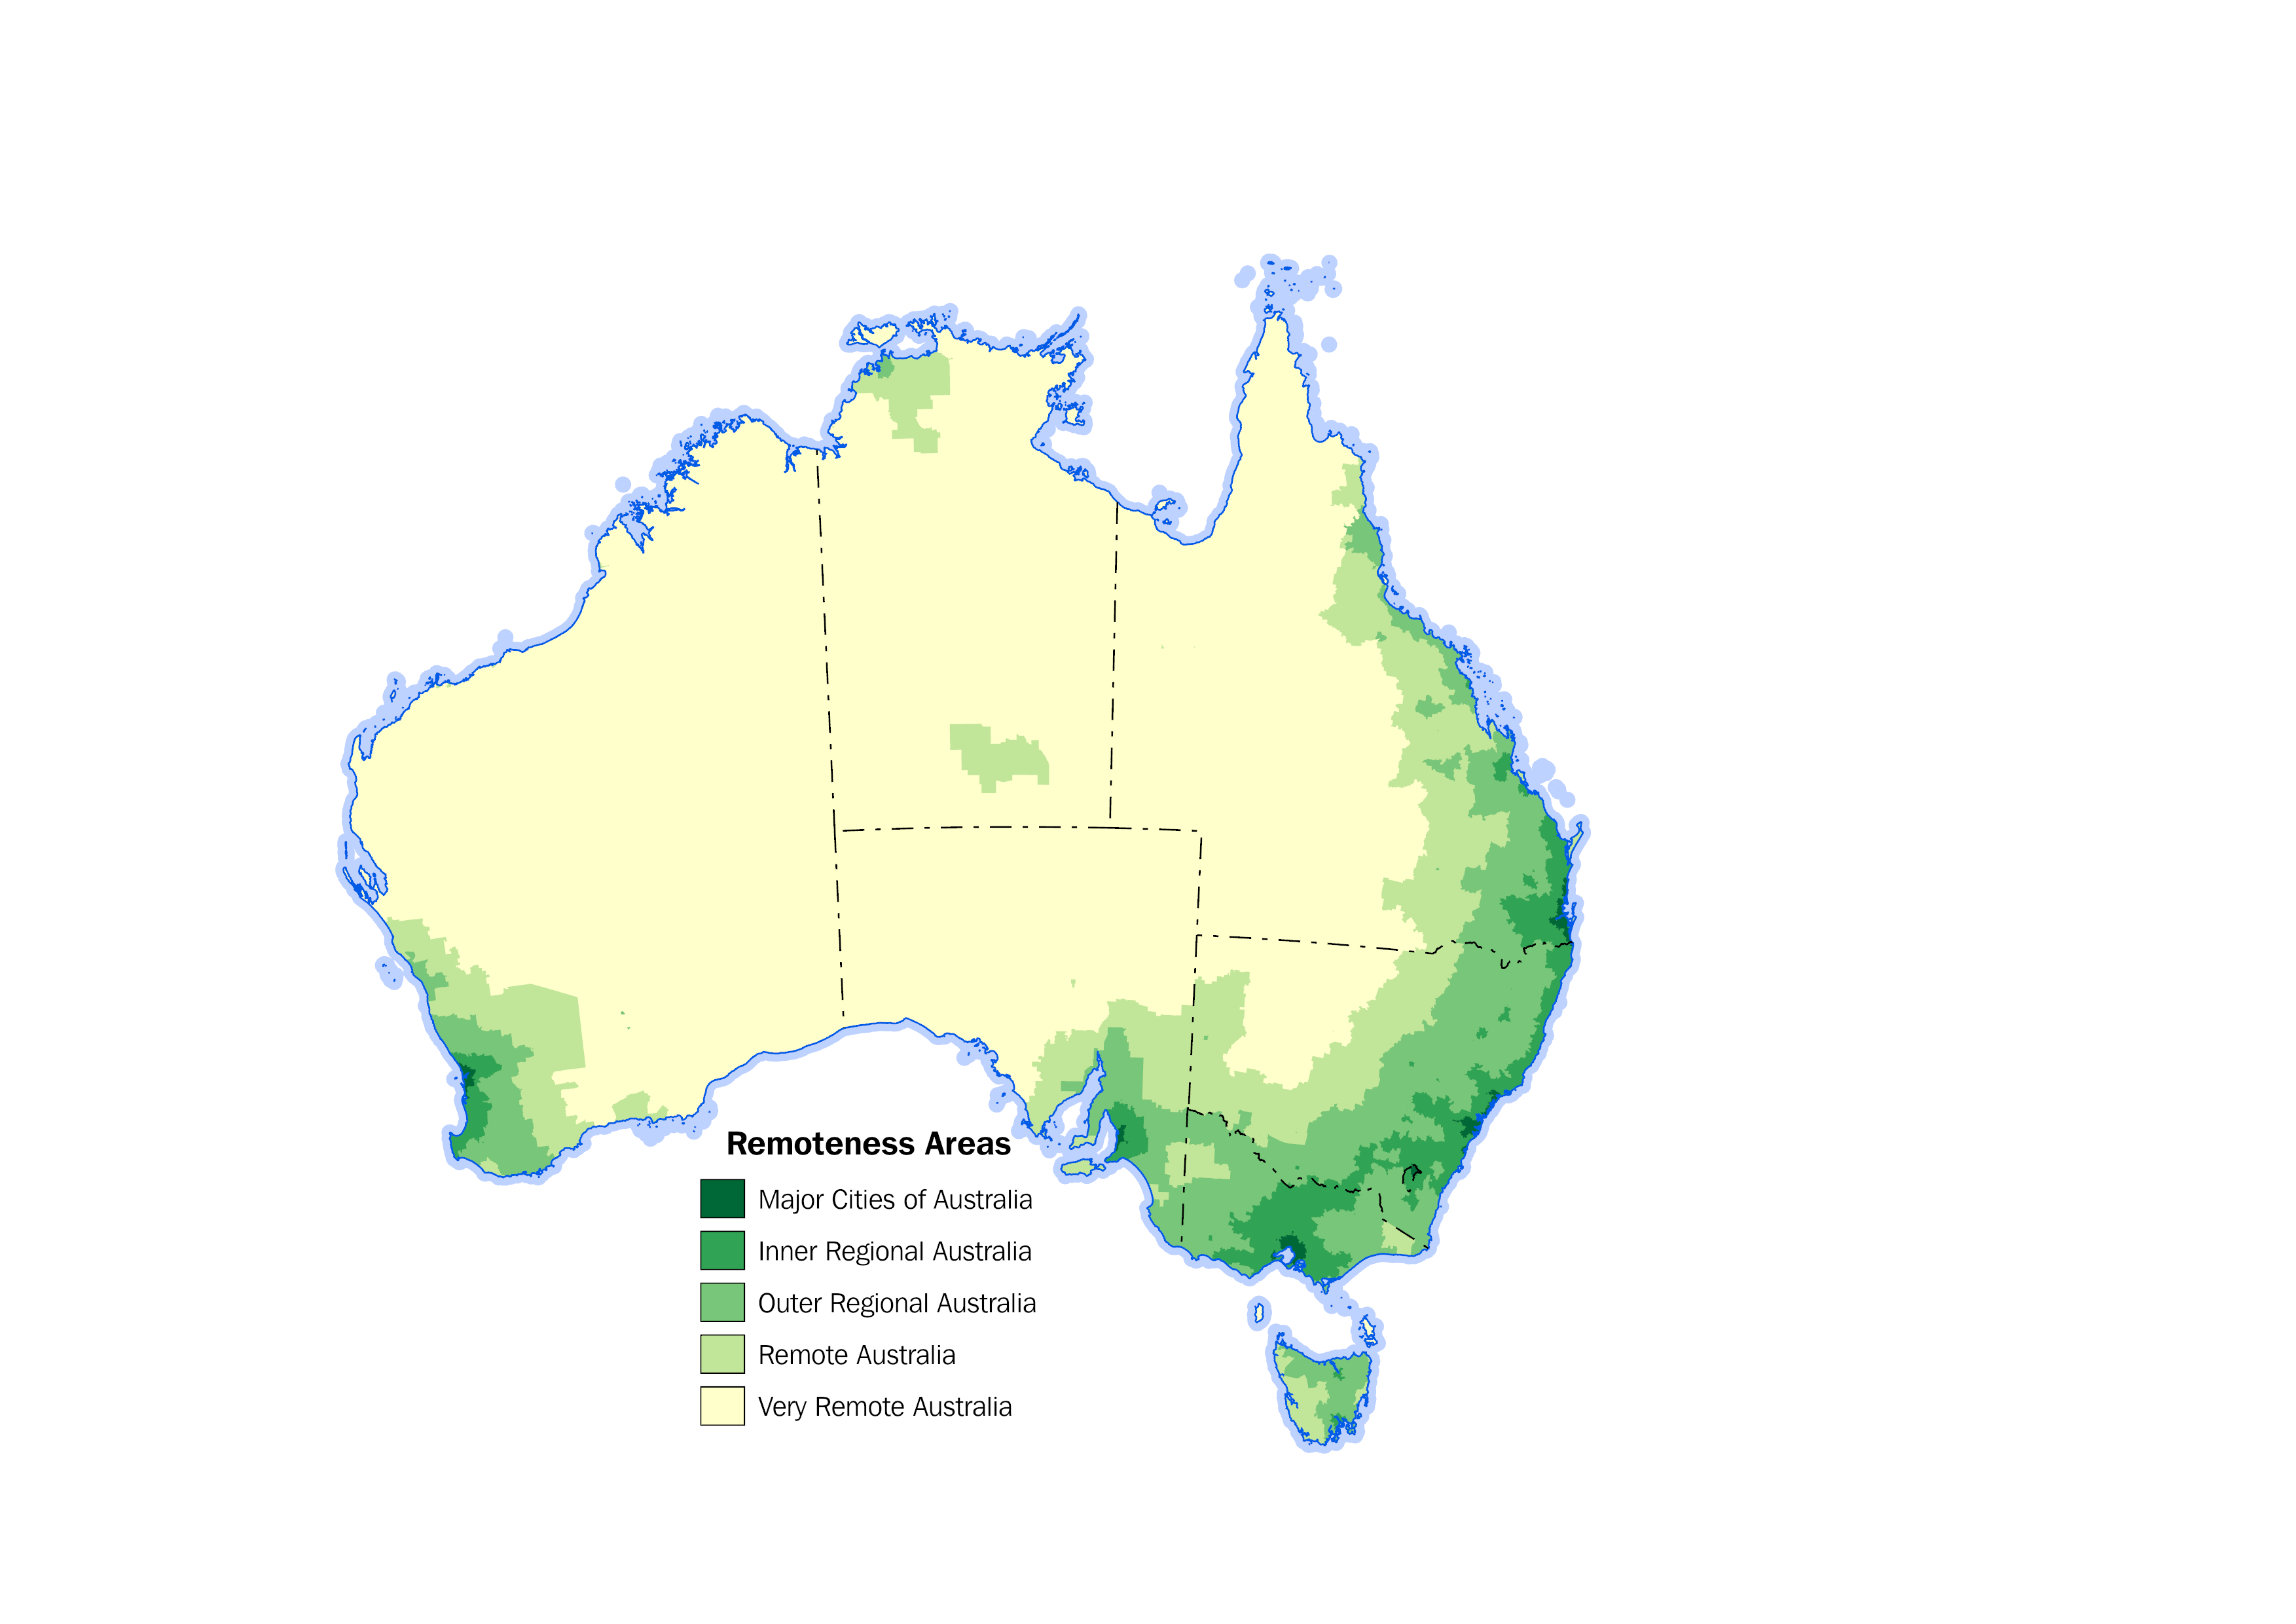 Map detailing the five different Remoteness Area classes. The map shows areas shaded in light to dark green colours, to demonstrate Very Remote Australia, Remote Australia, Outer Regional Australia, Inner Regional Australia and Major Cities of Australia respectively.